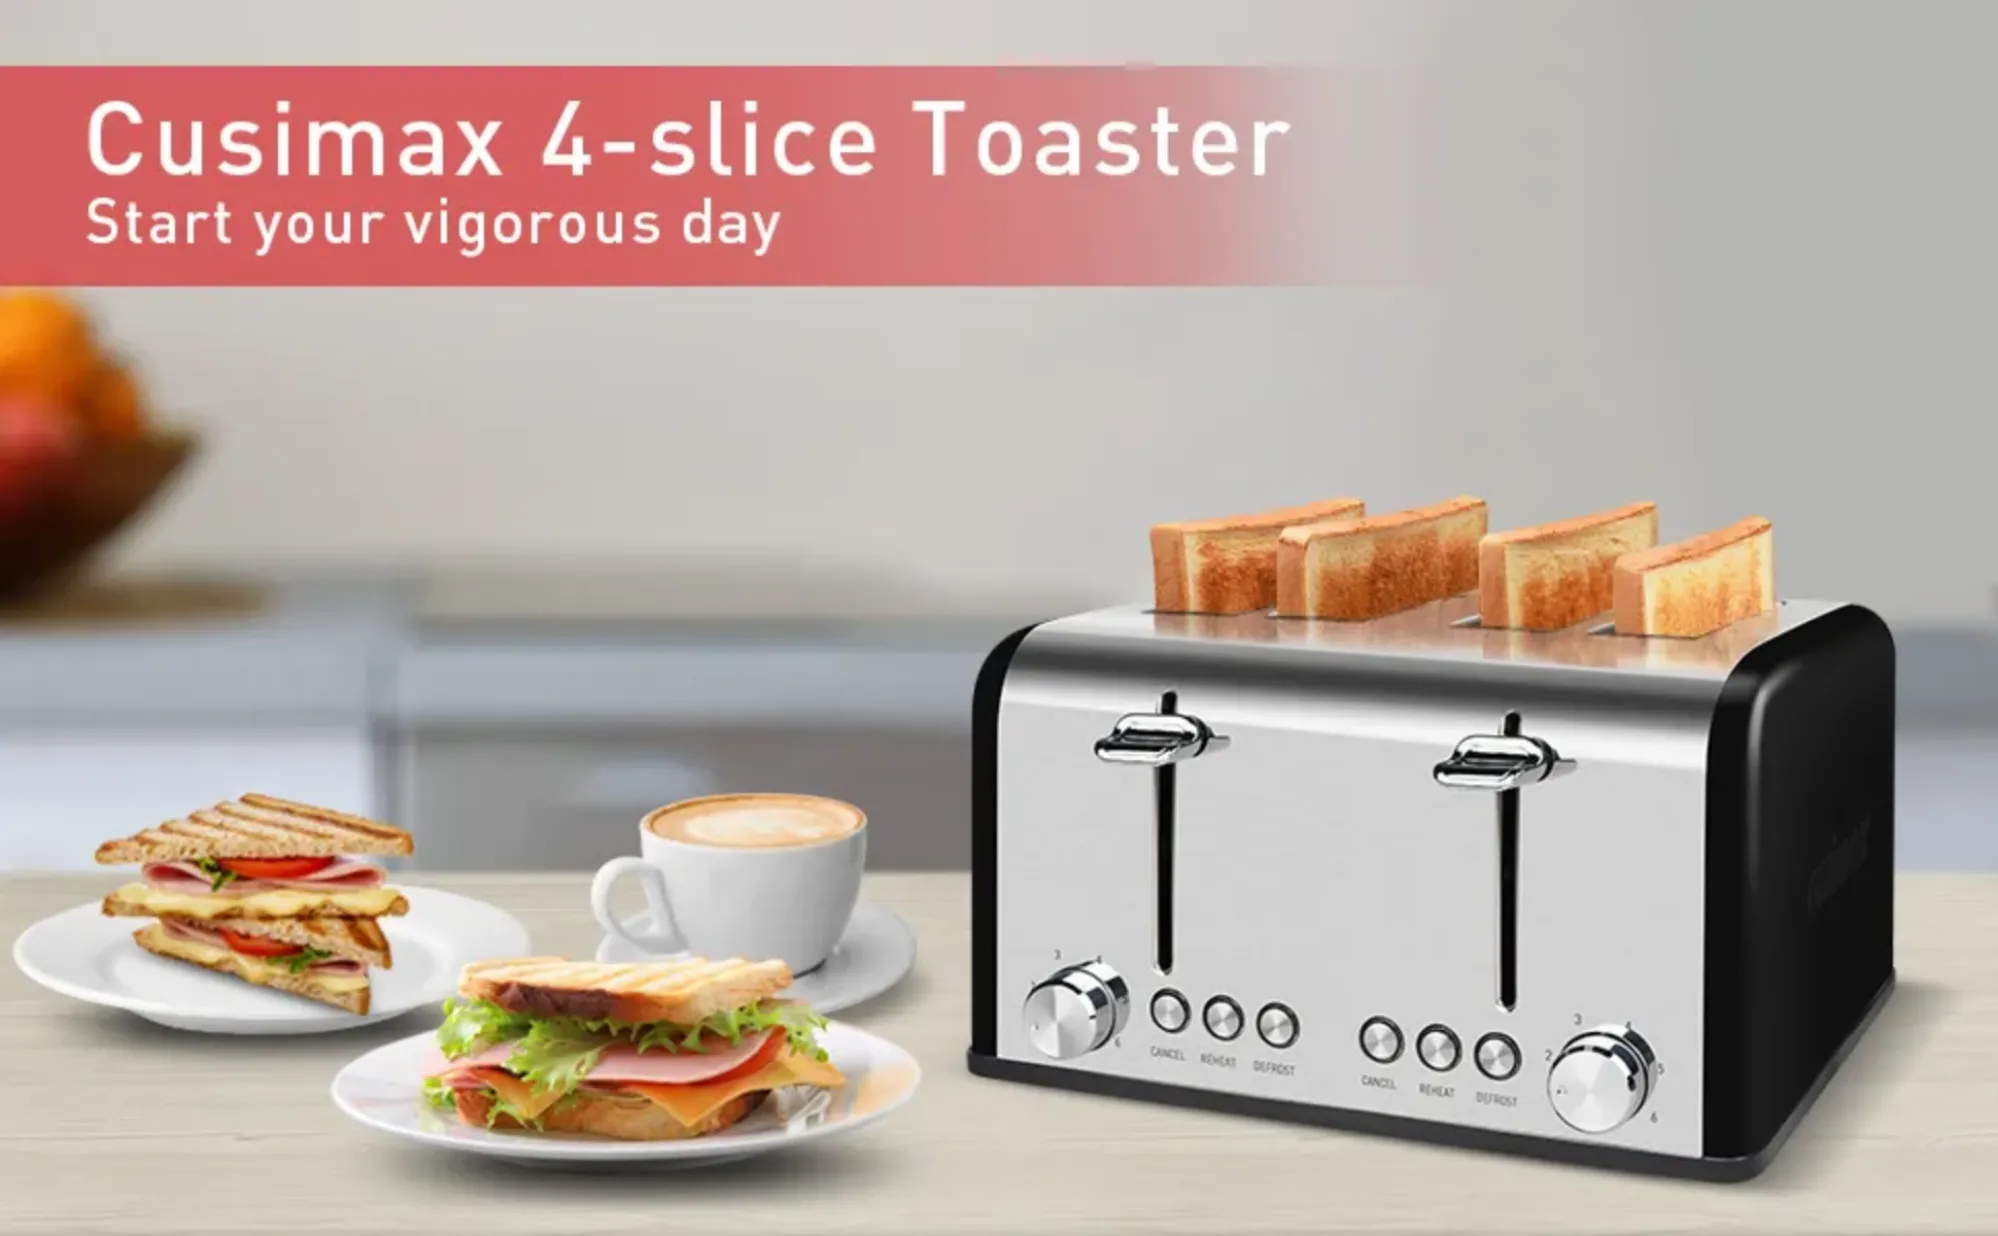 Cusimax Stainless Steel Toaster 4 Slice with Long Extra Wide Slots & R